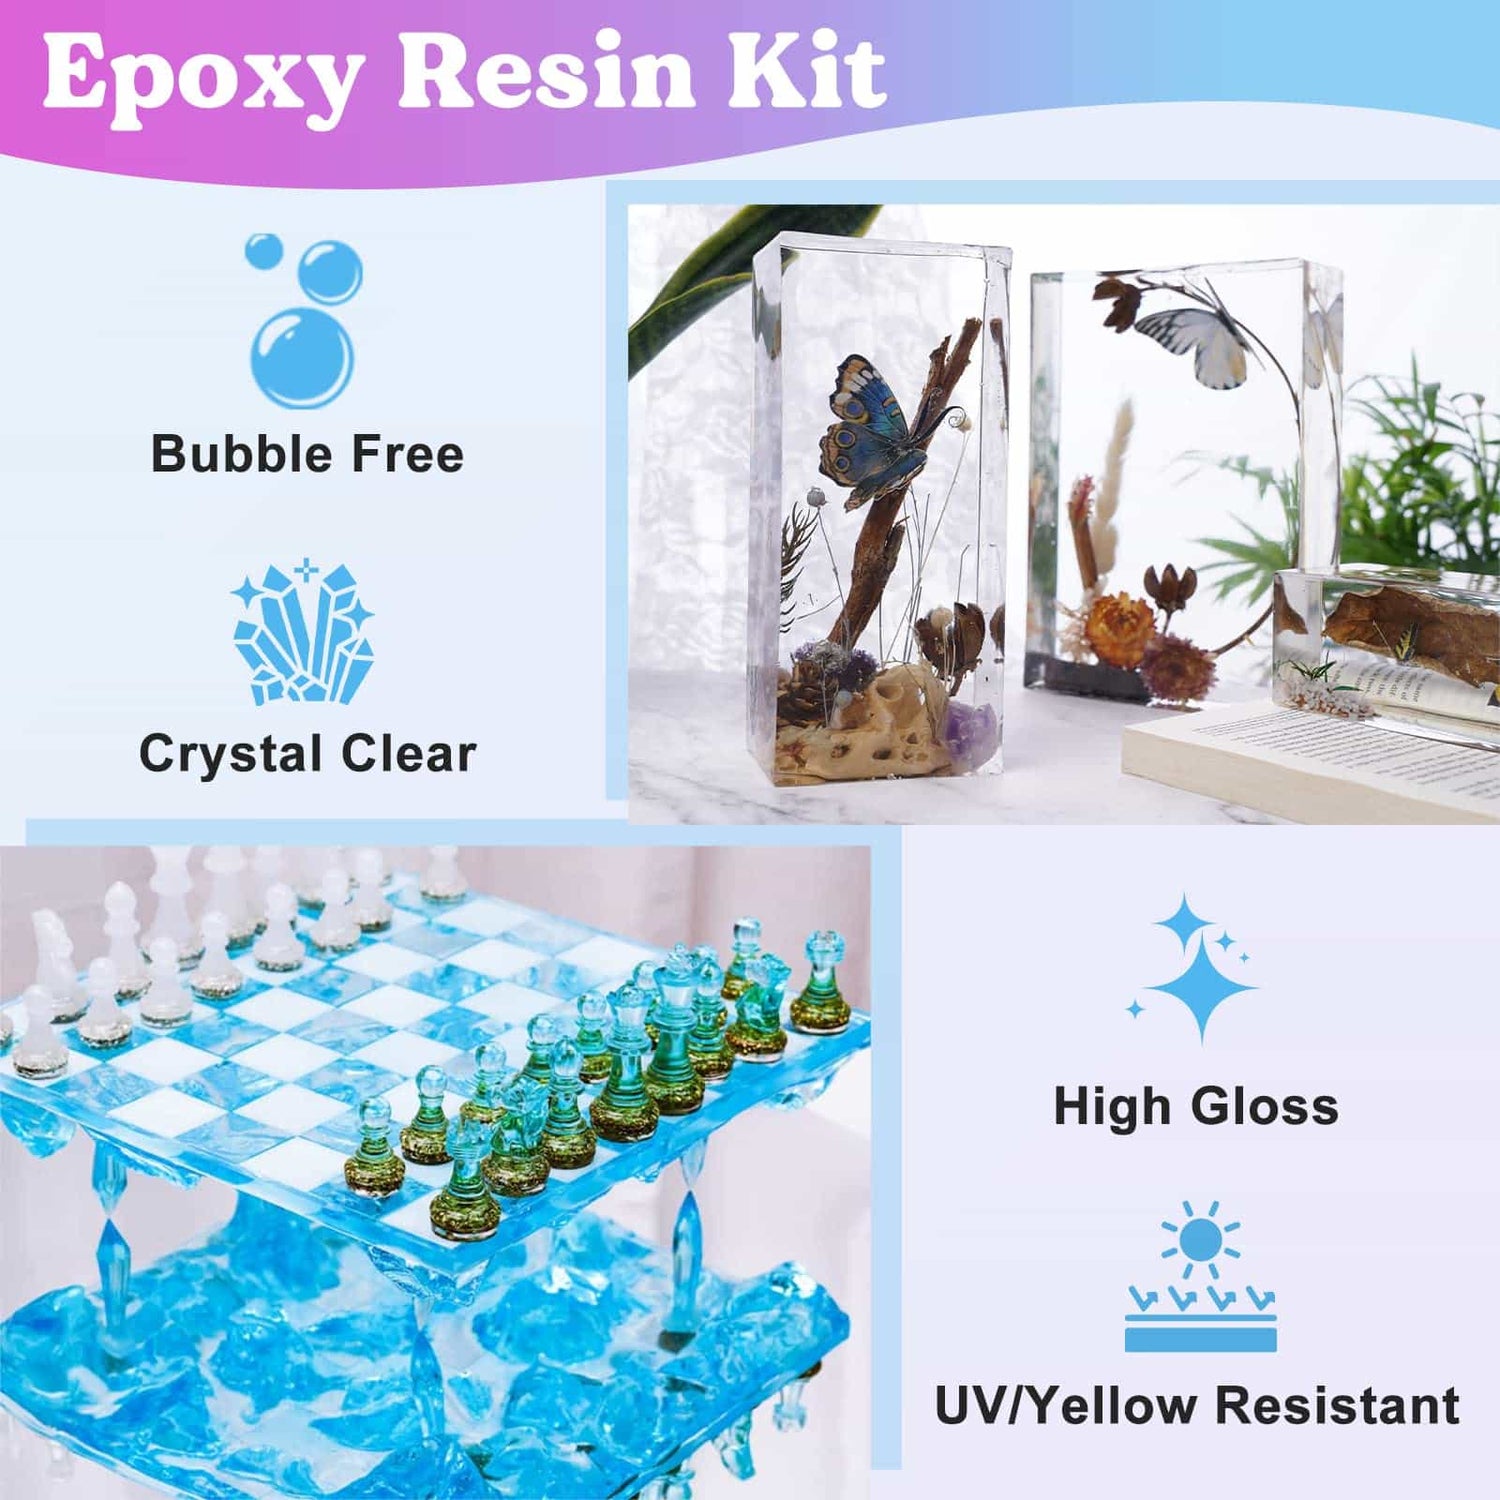 64 oz Epoxy Resin - Super Clear,Bubbles Free,Casting,Table Top